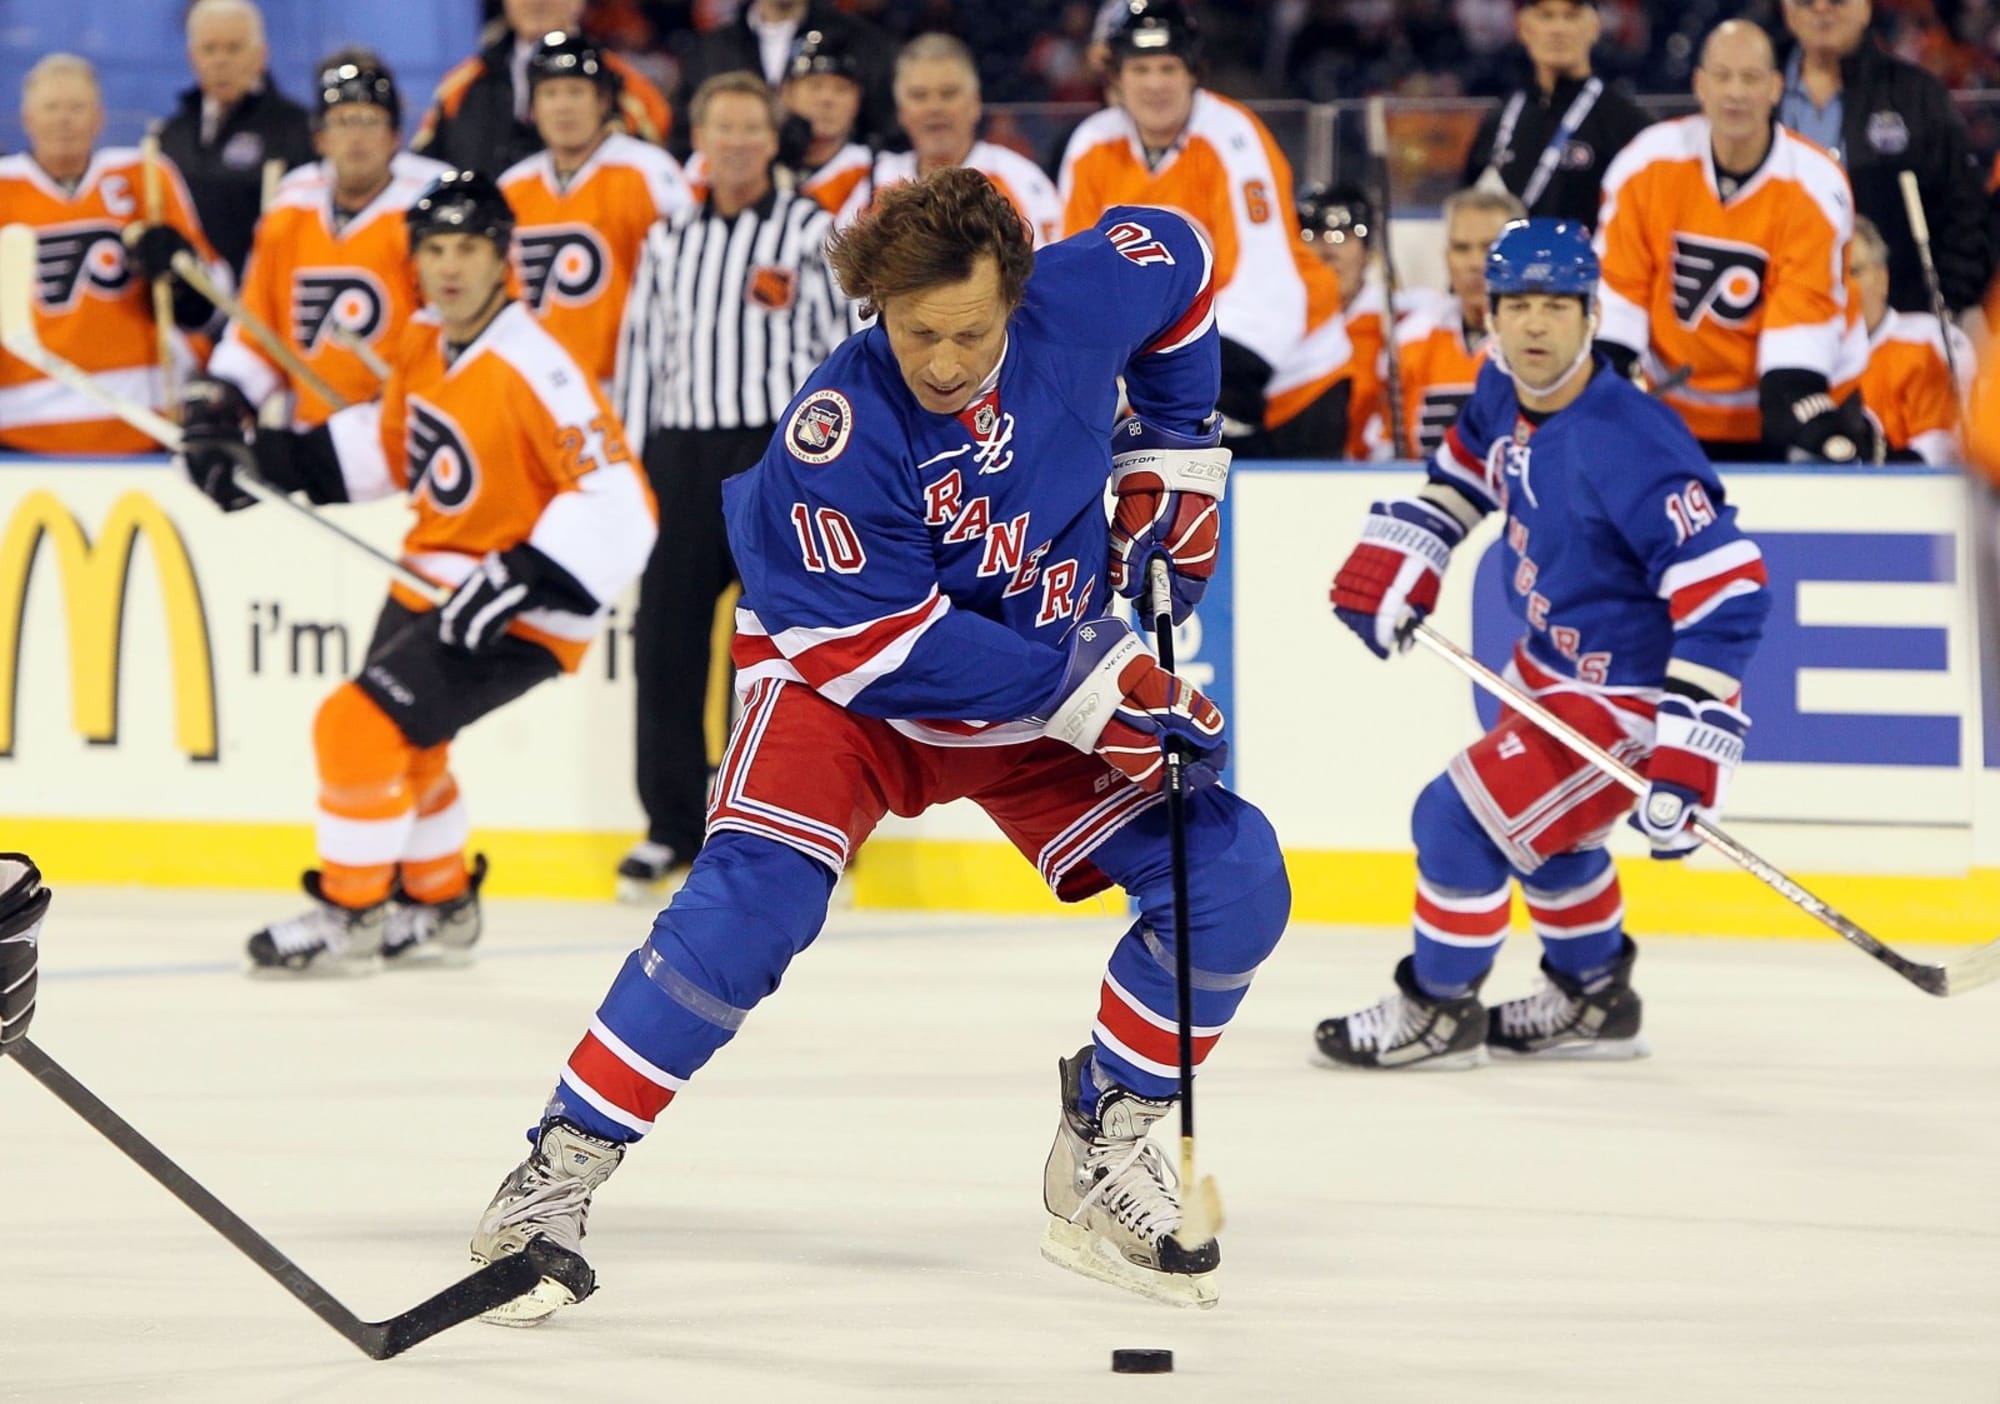 Former New York Rangers hockey player Ron Duguay attends the 16th